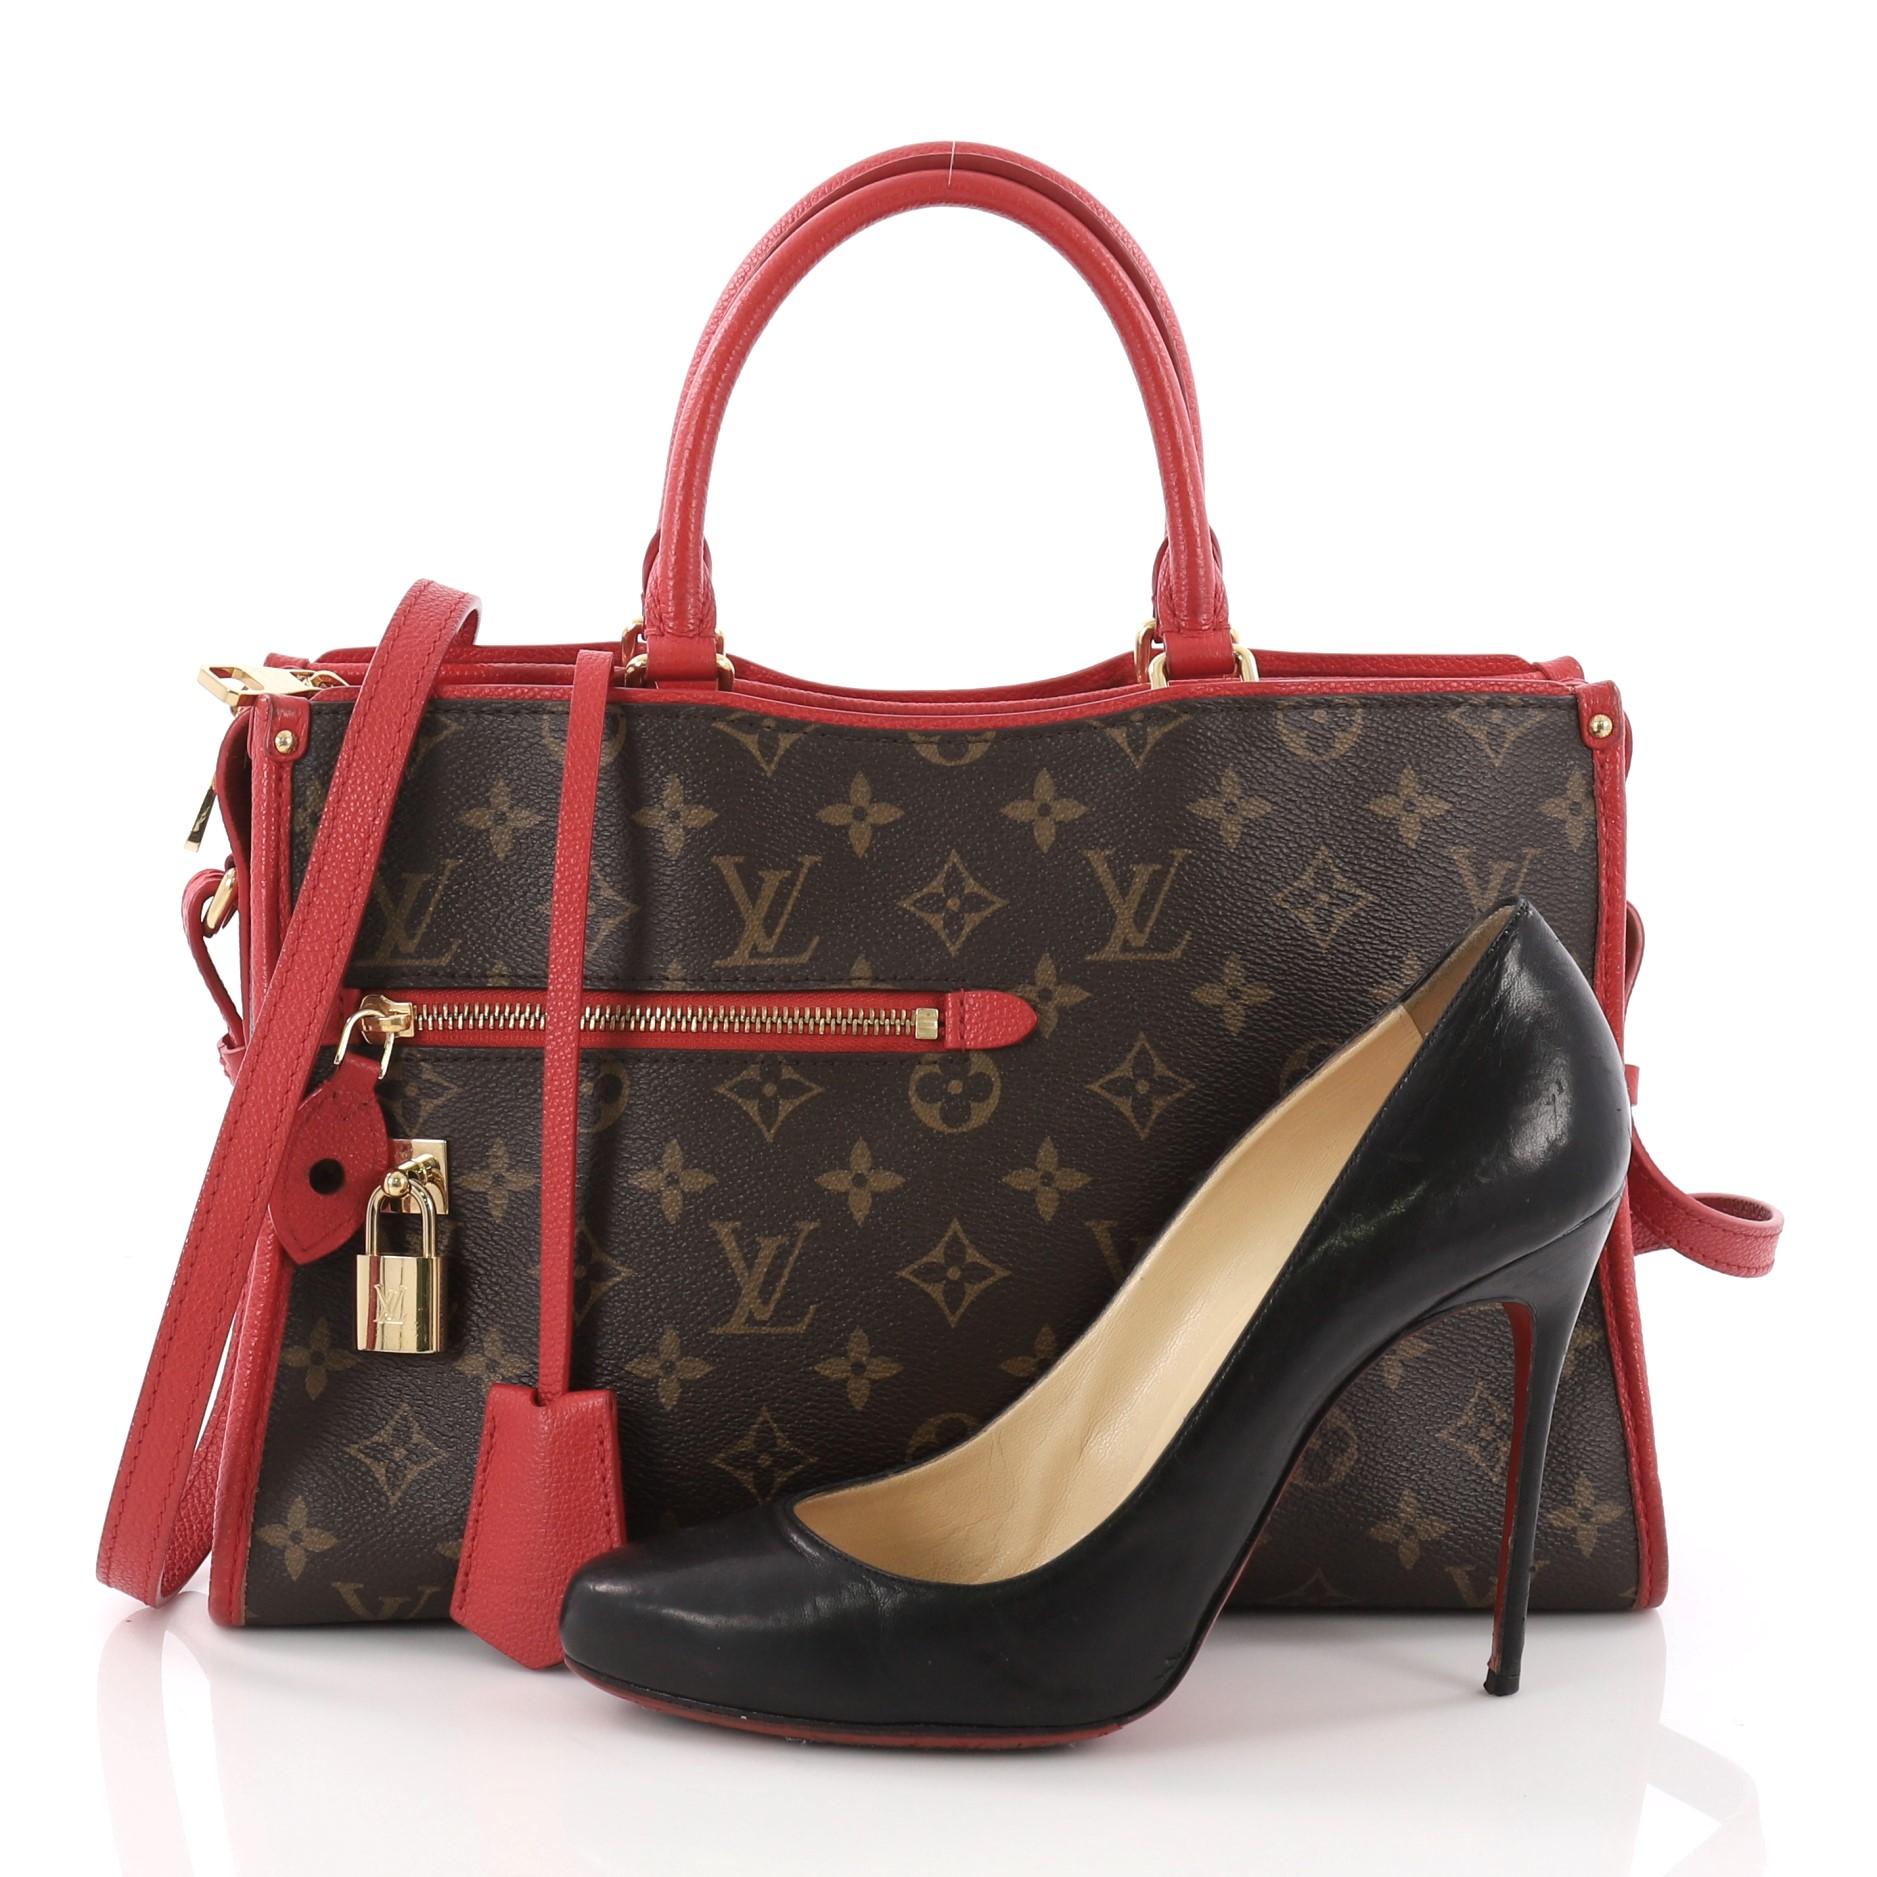 This Louis Vuitton Popincourt NM Handbag Monogram Canvas PM, crafted from brown monogram coated canvas, features dual rolled leather handles, exterior zip pocket, two large outside pockets, and gold-tone hardware. Its zip closure opens to a red